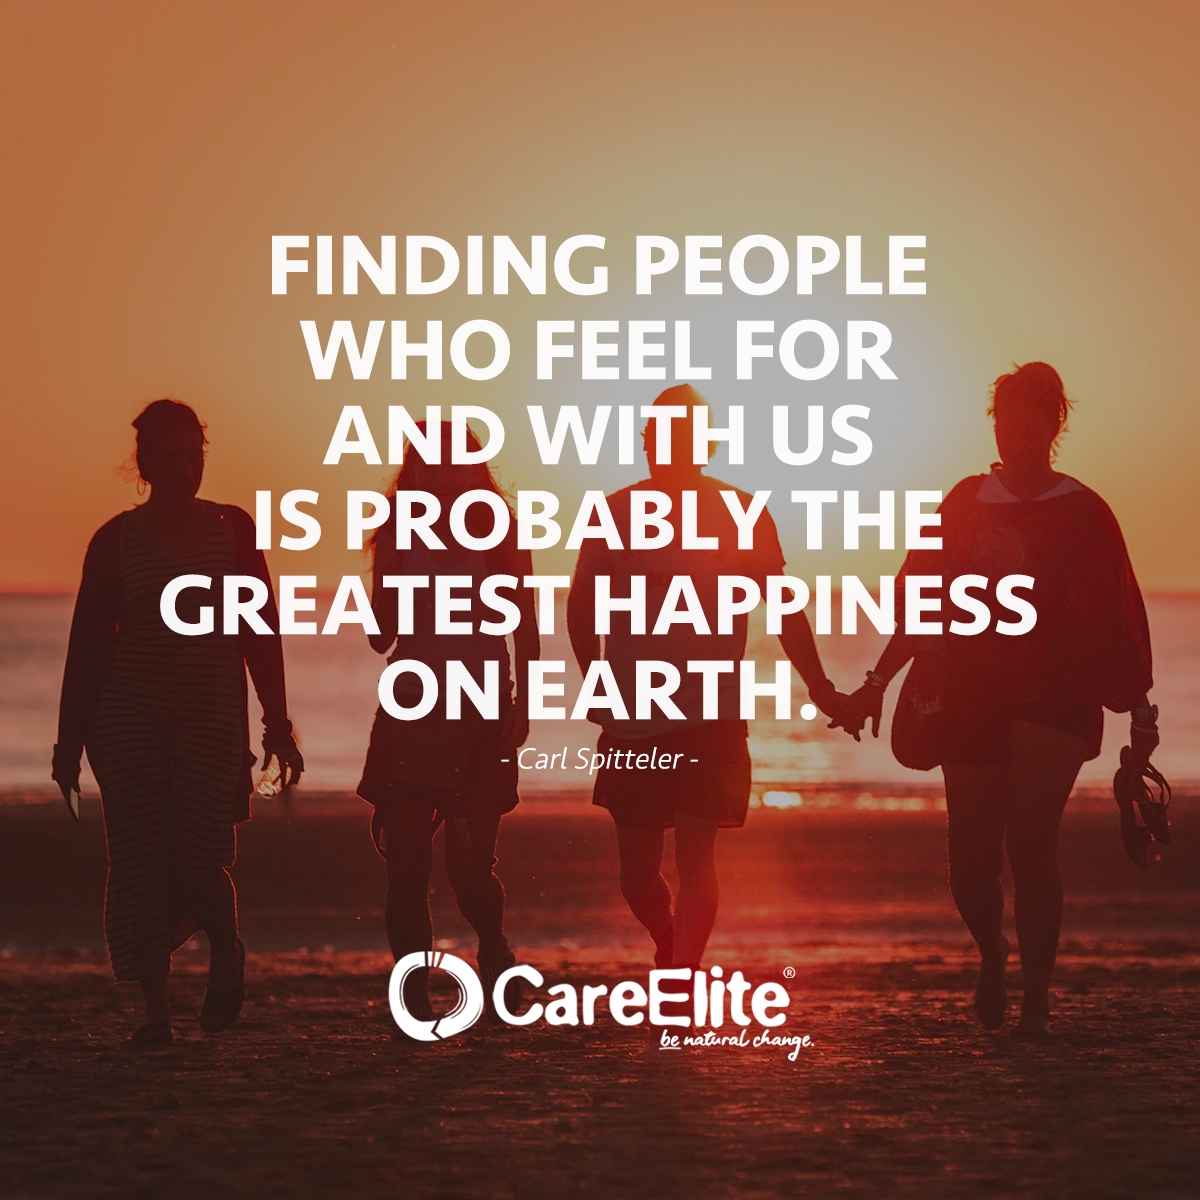 "Finding people who feel for and with us is probably the greatest happiness on earth." (Carl Spitteler)